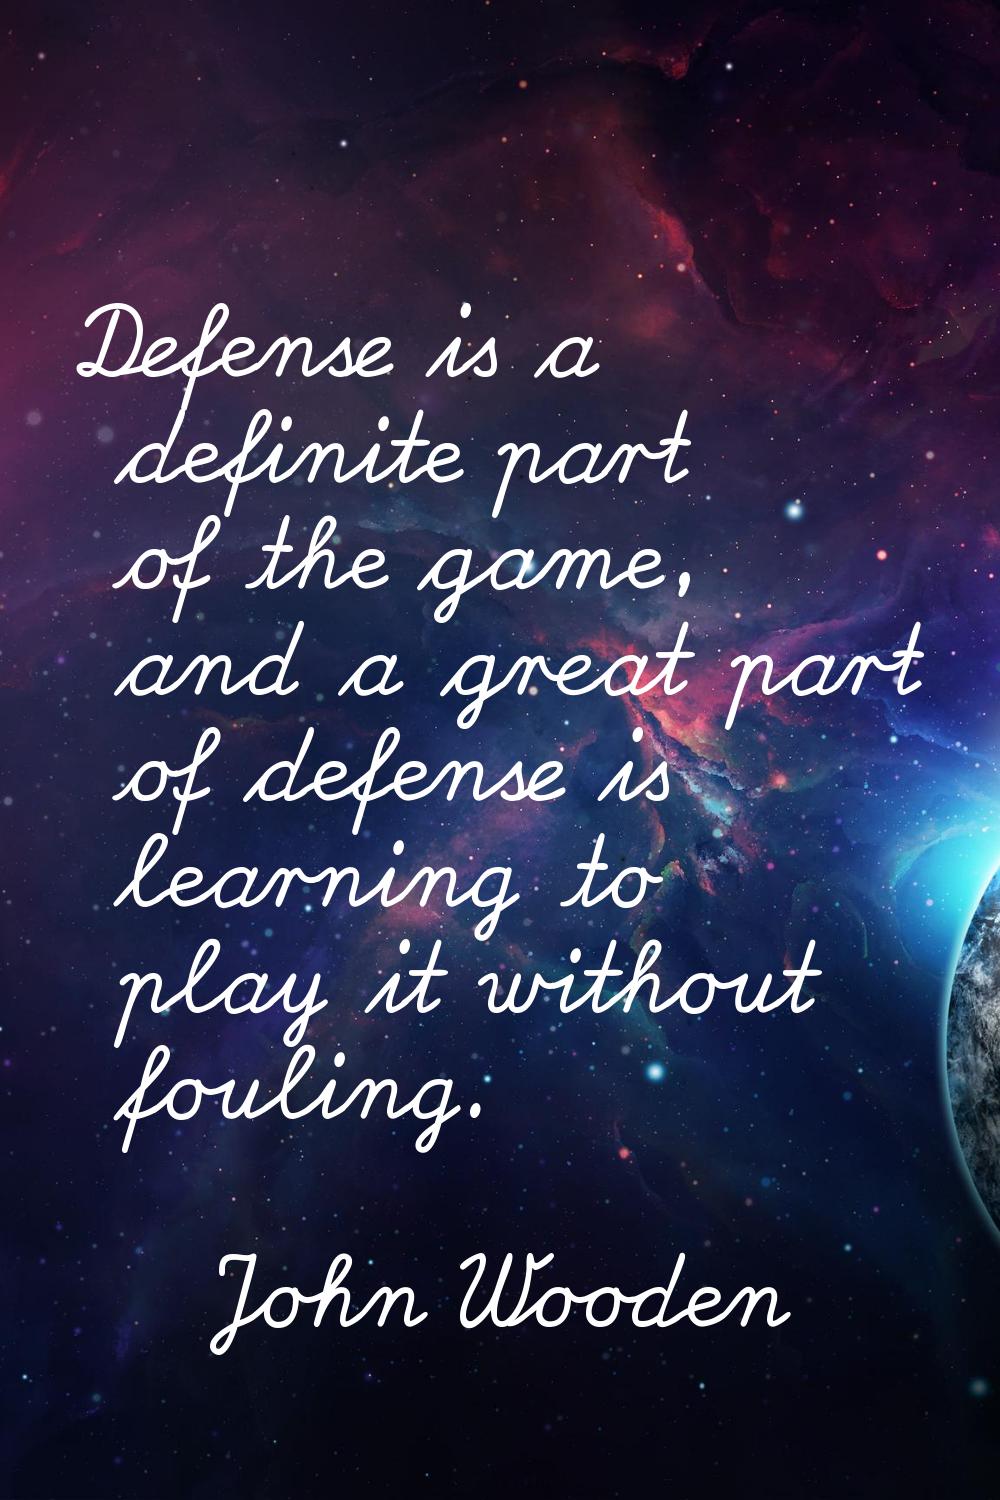 Defense is a definite part of the game, and a great part of defense is learning to play it without 